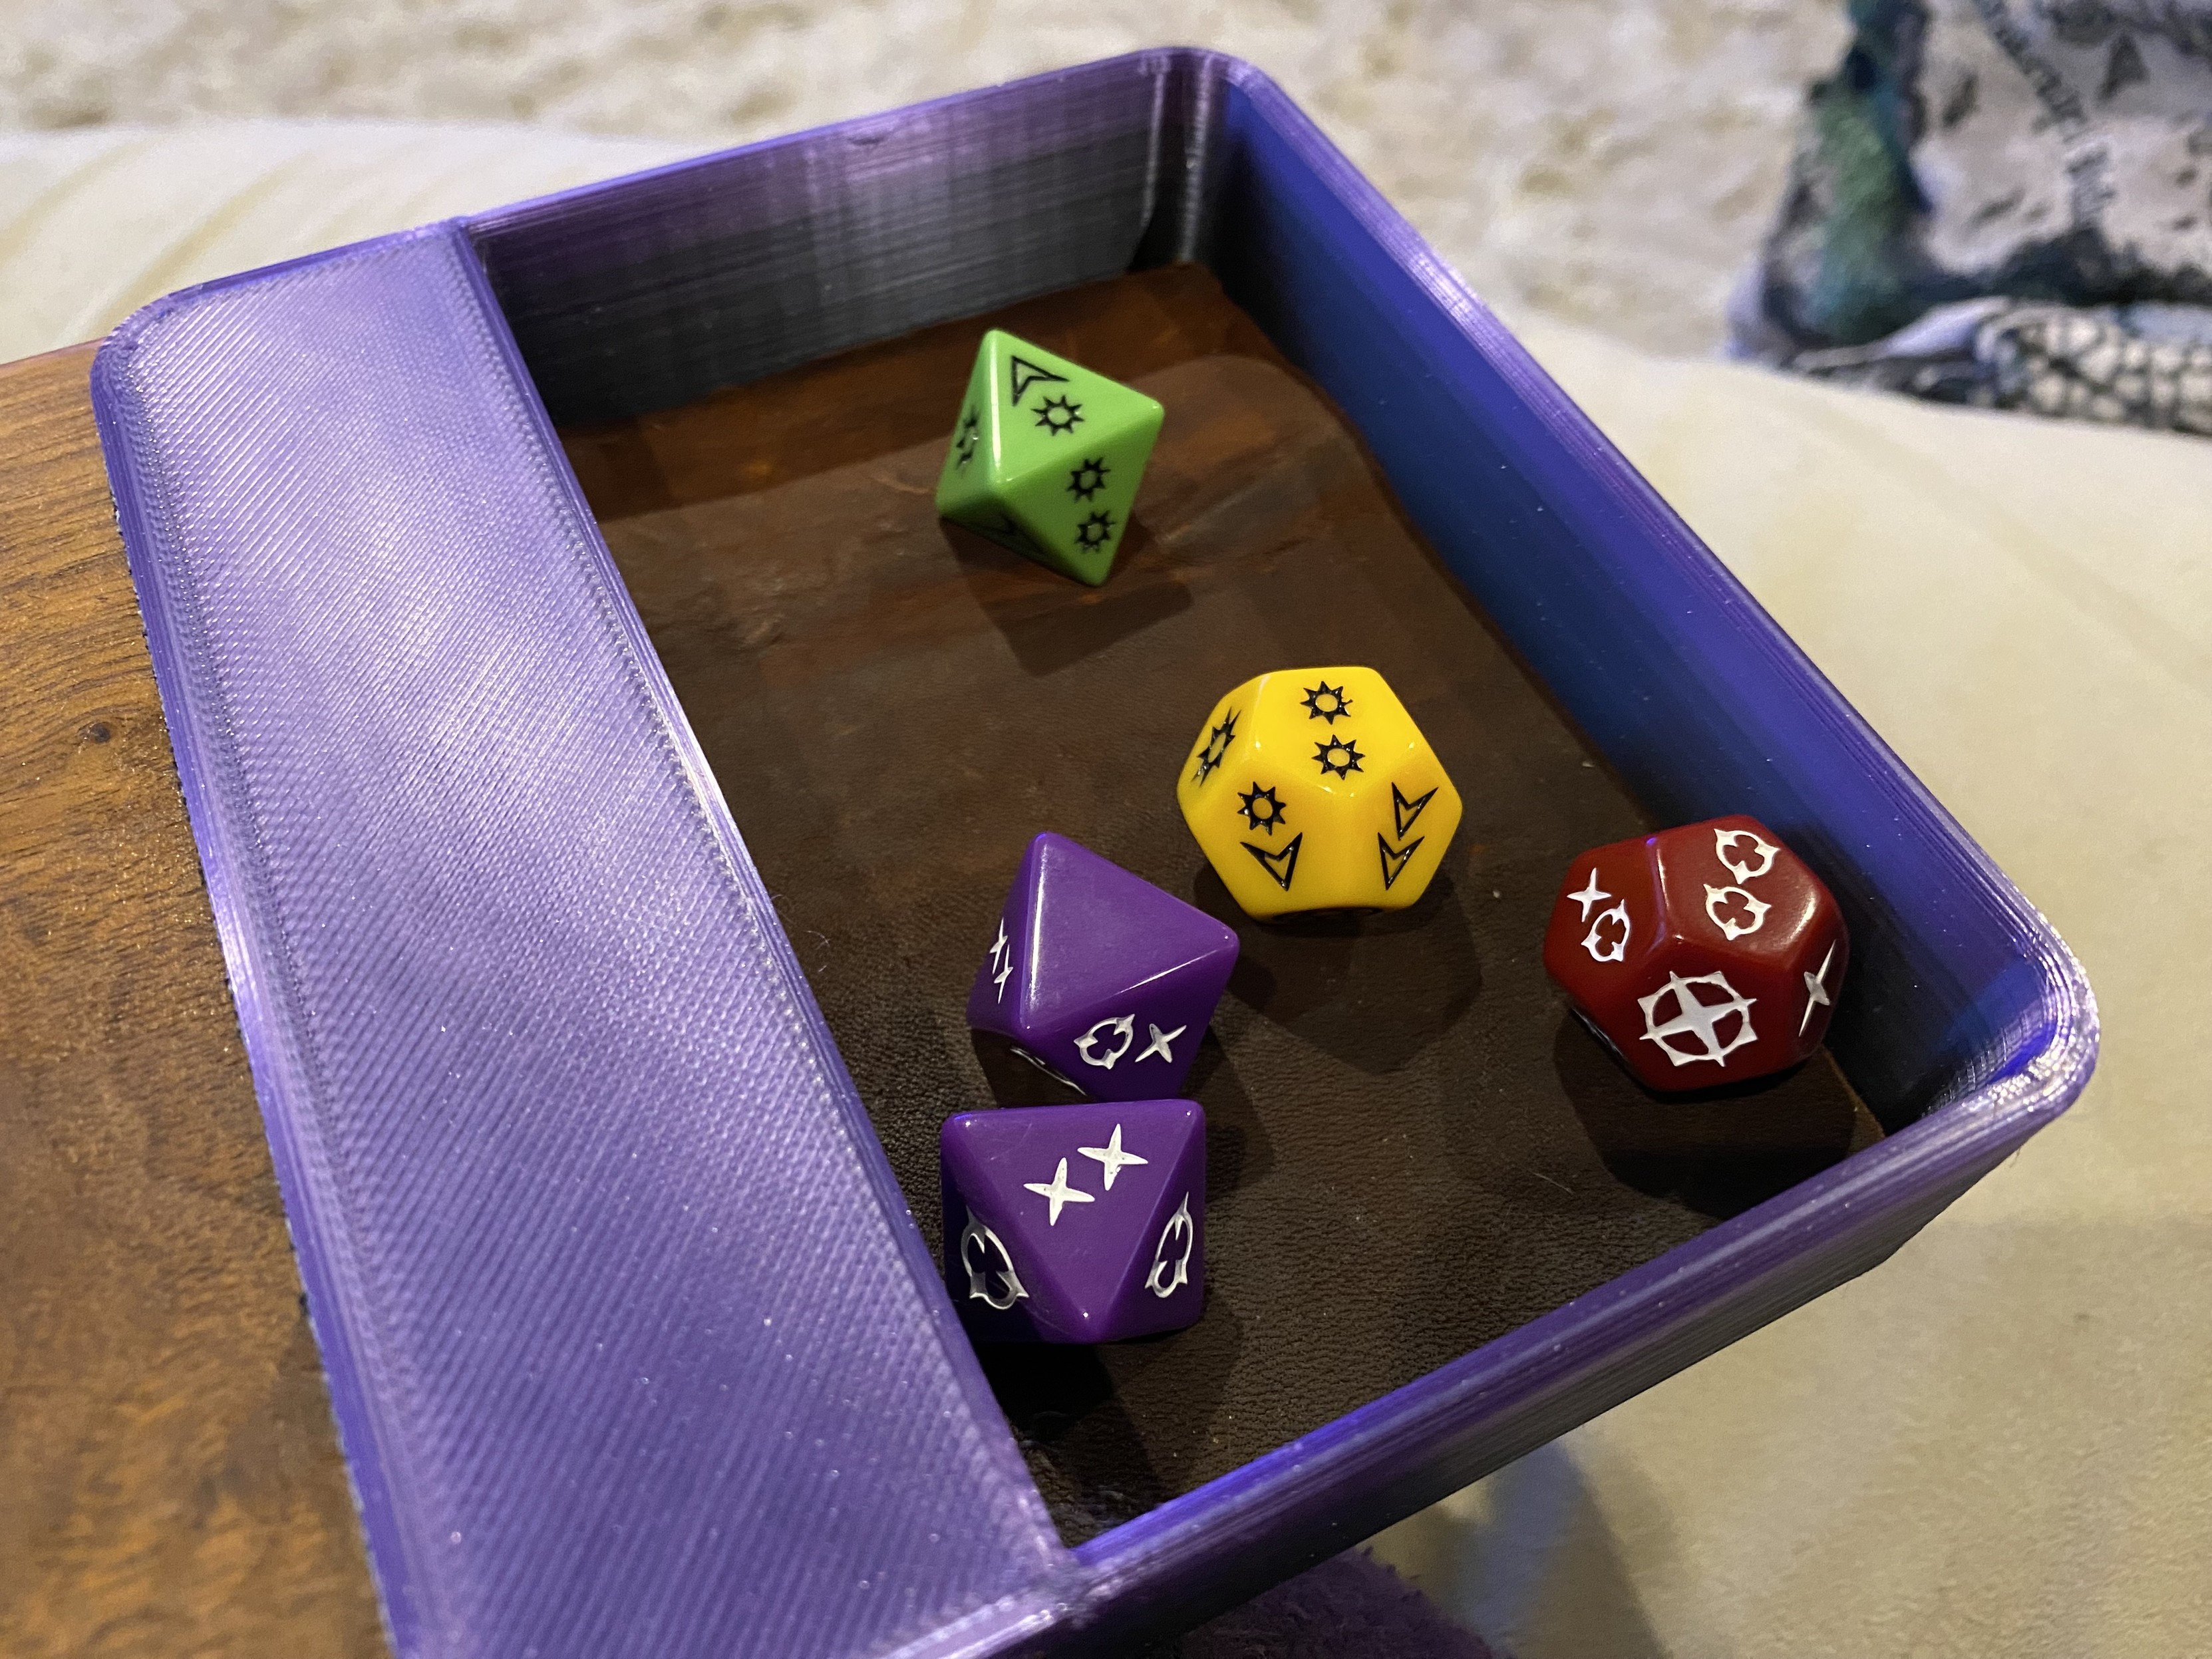 a close-up of small purple dice tray with a lip that is slid over a wooden lap desk. The bottom of the dice tray is lined with leather and has 5 colorful dice in it from the Genesys System Role Playing Game